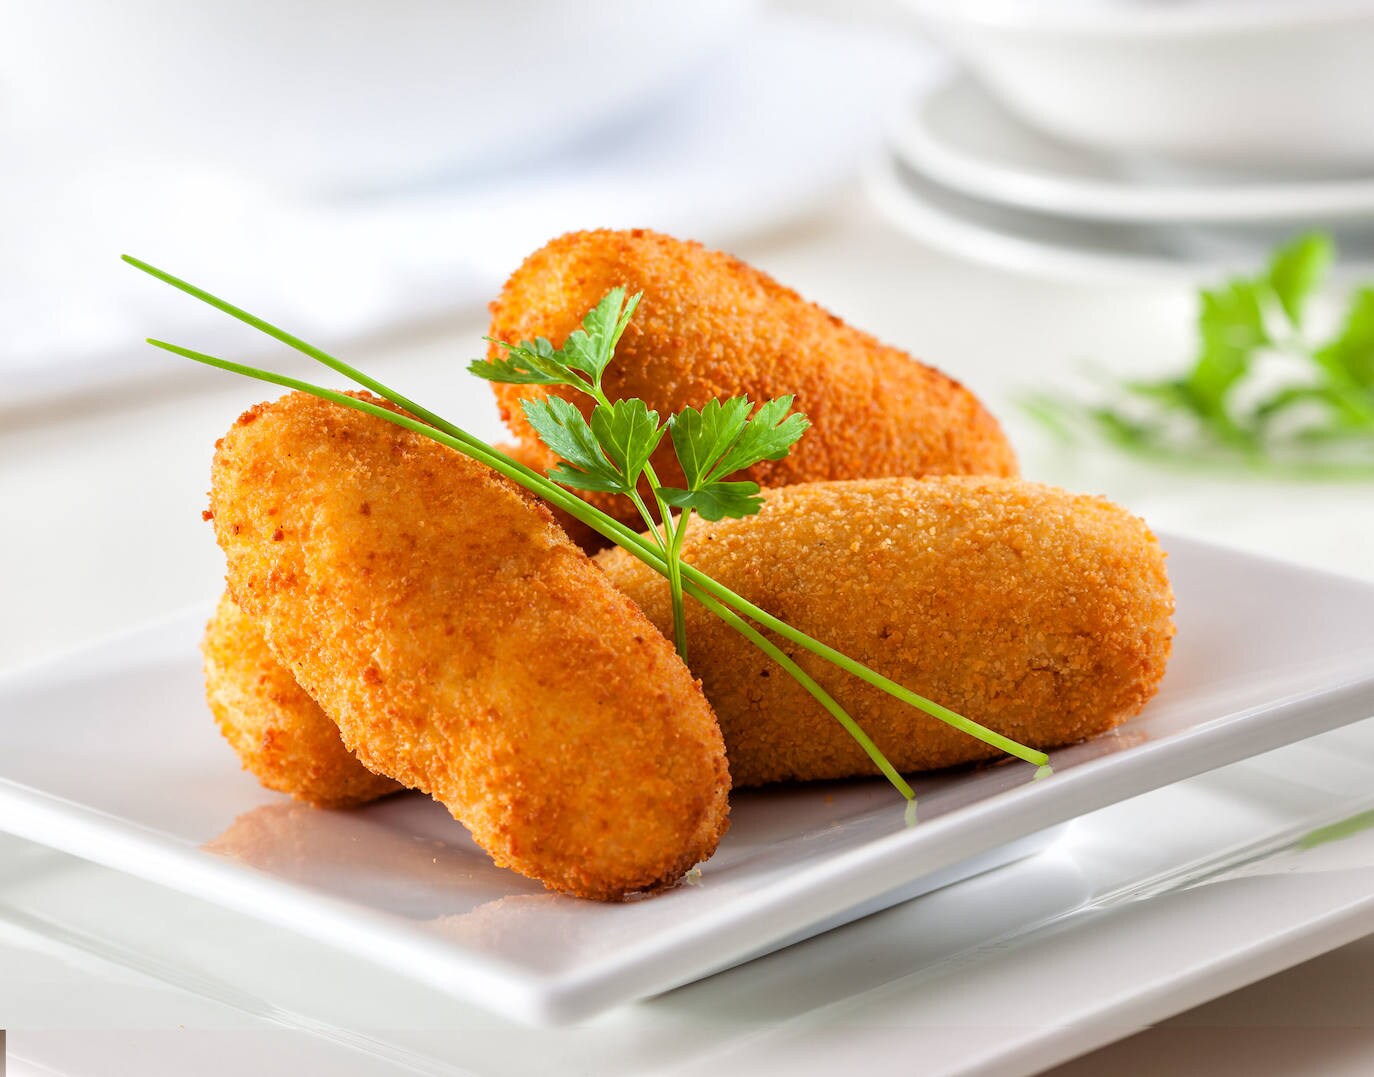 Roasted chicken croquettes.